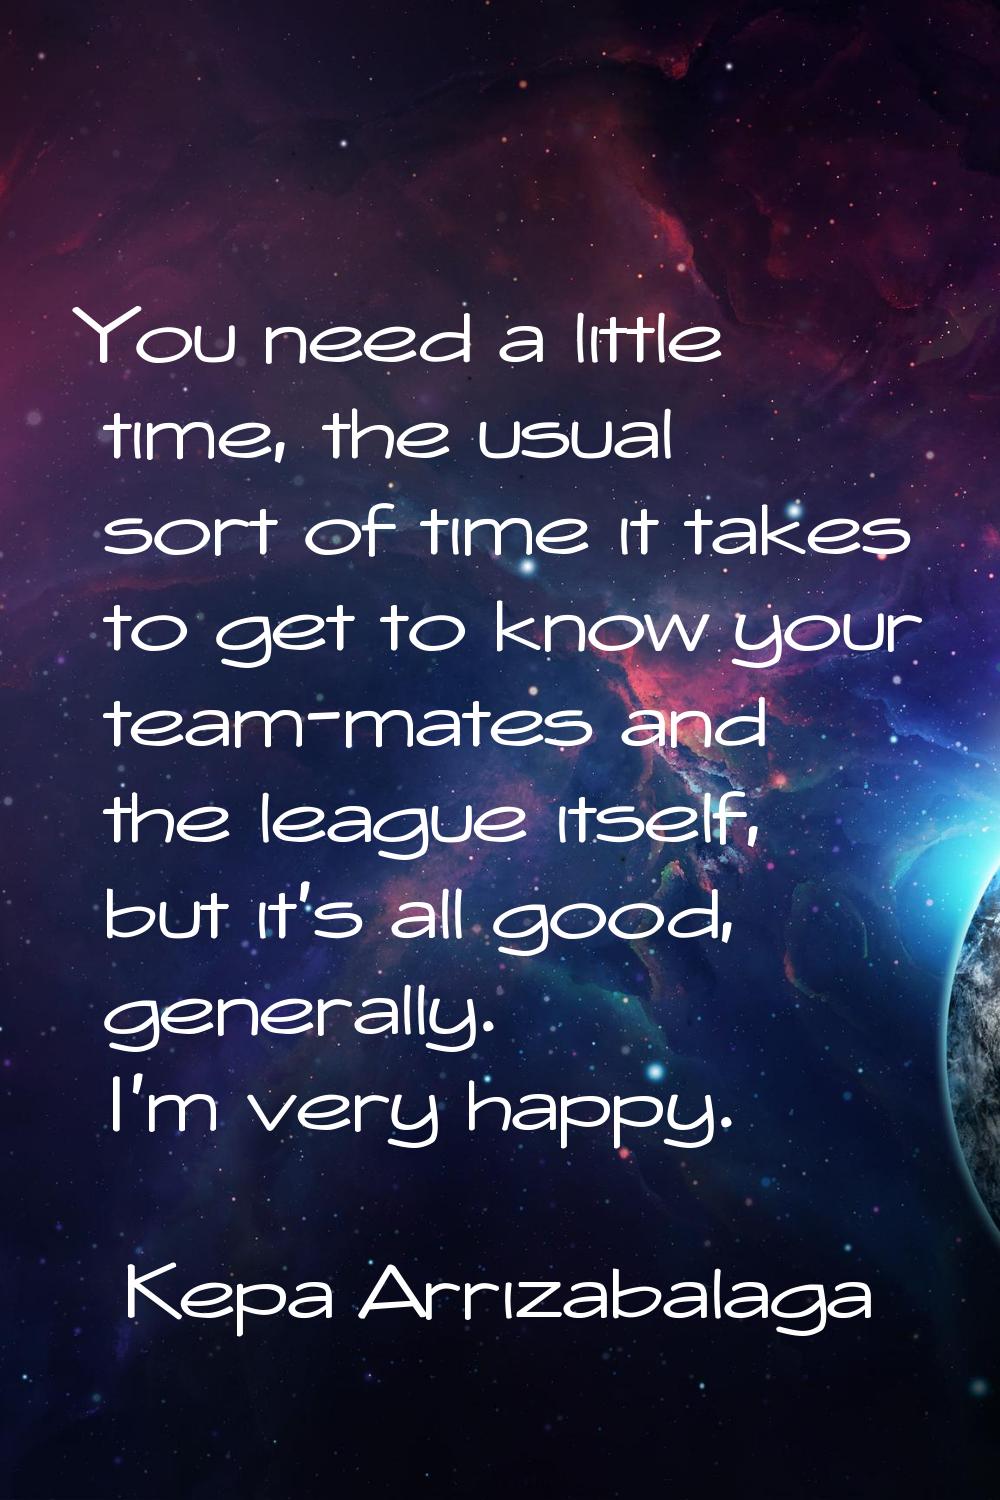 You need a little time, the usual sort of time it takes to get to know your team-mates and the leag